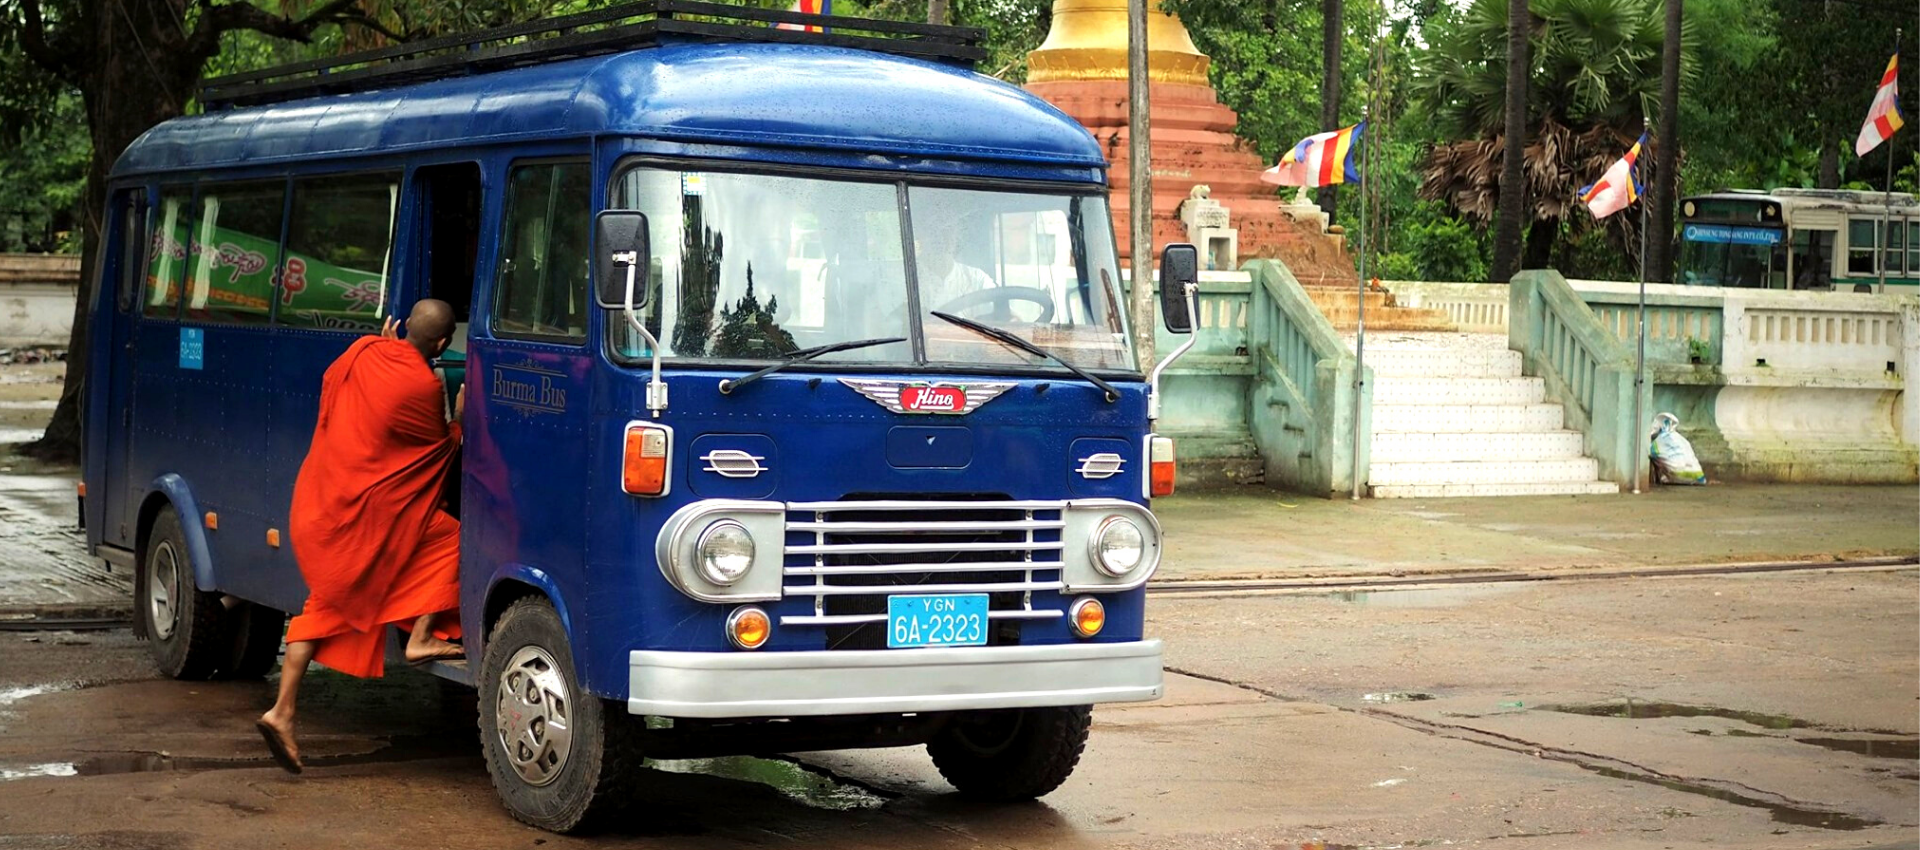 Burma Bus with monk